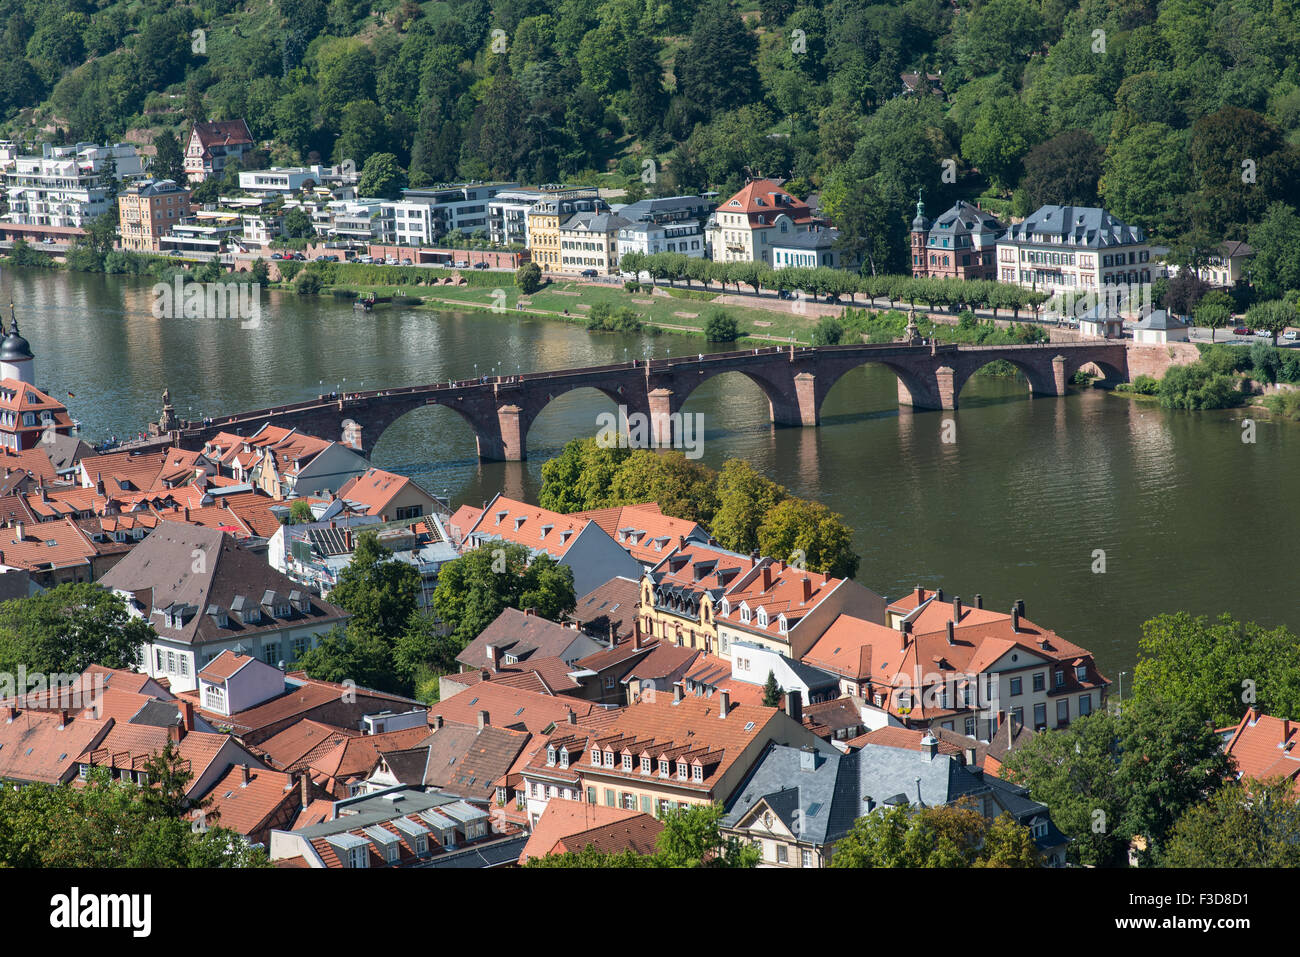 Cityscape of the historical town of Heidelberg in Germany from the castle hill with view of the Alte Bruecke, old bridge. Stock Photo